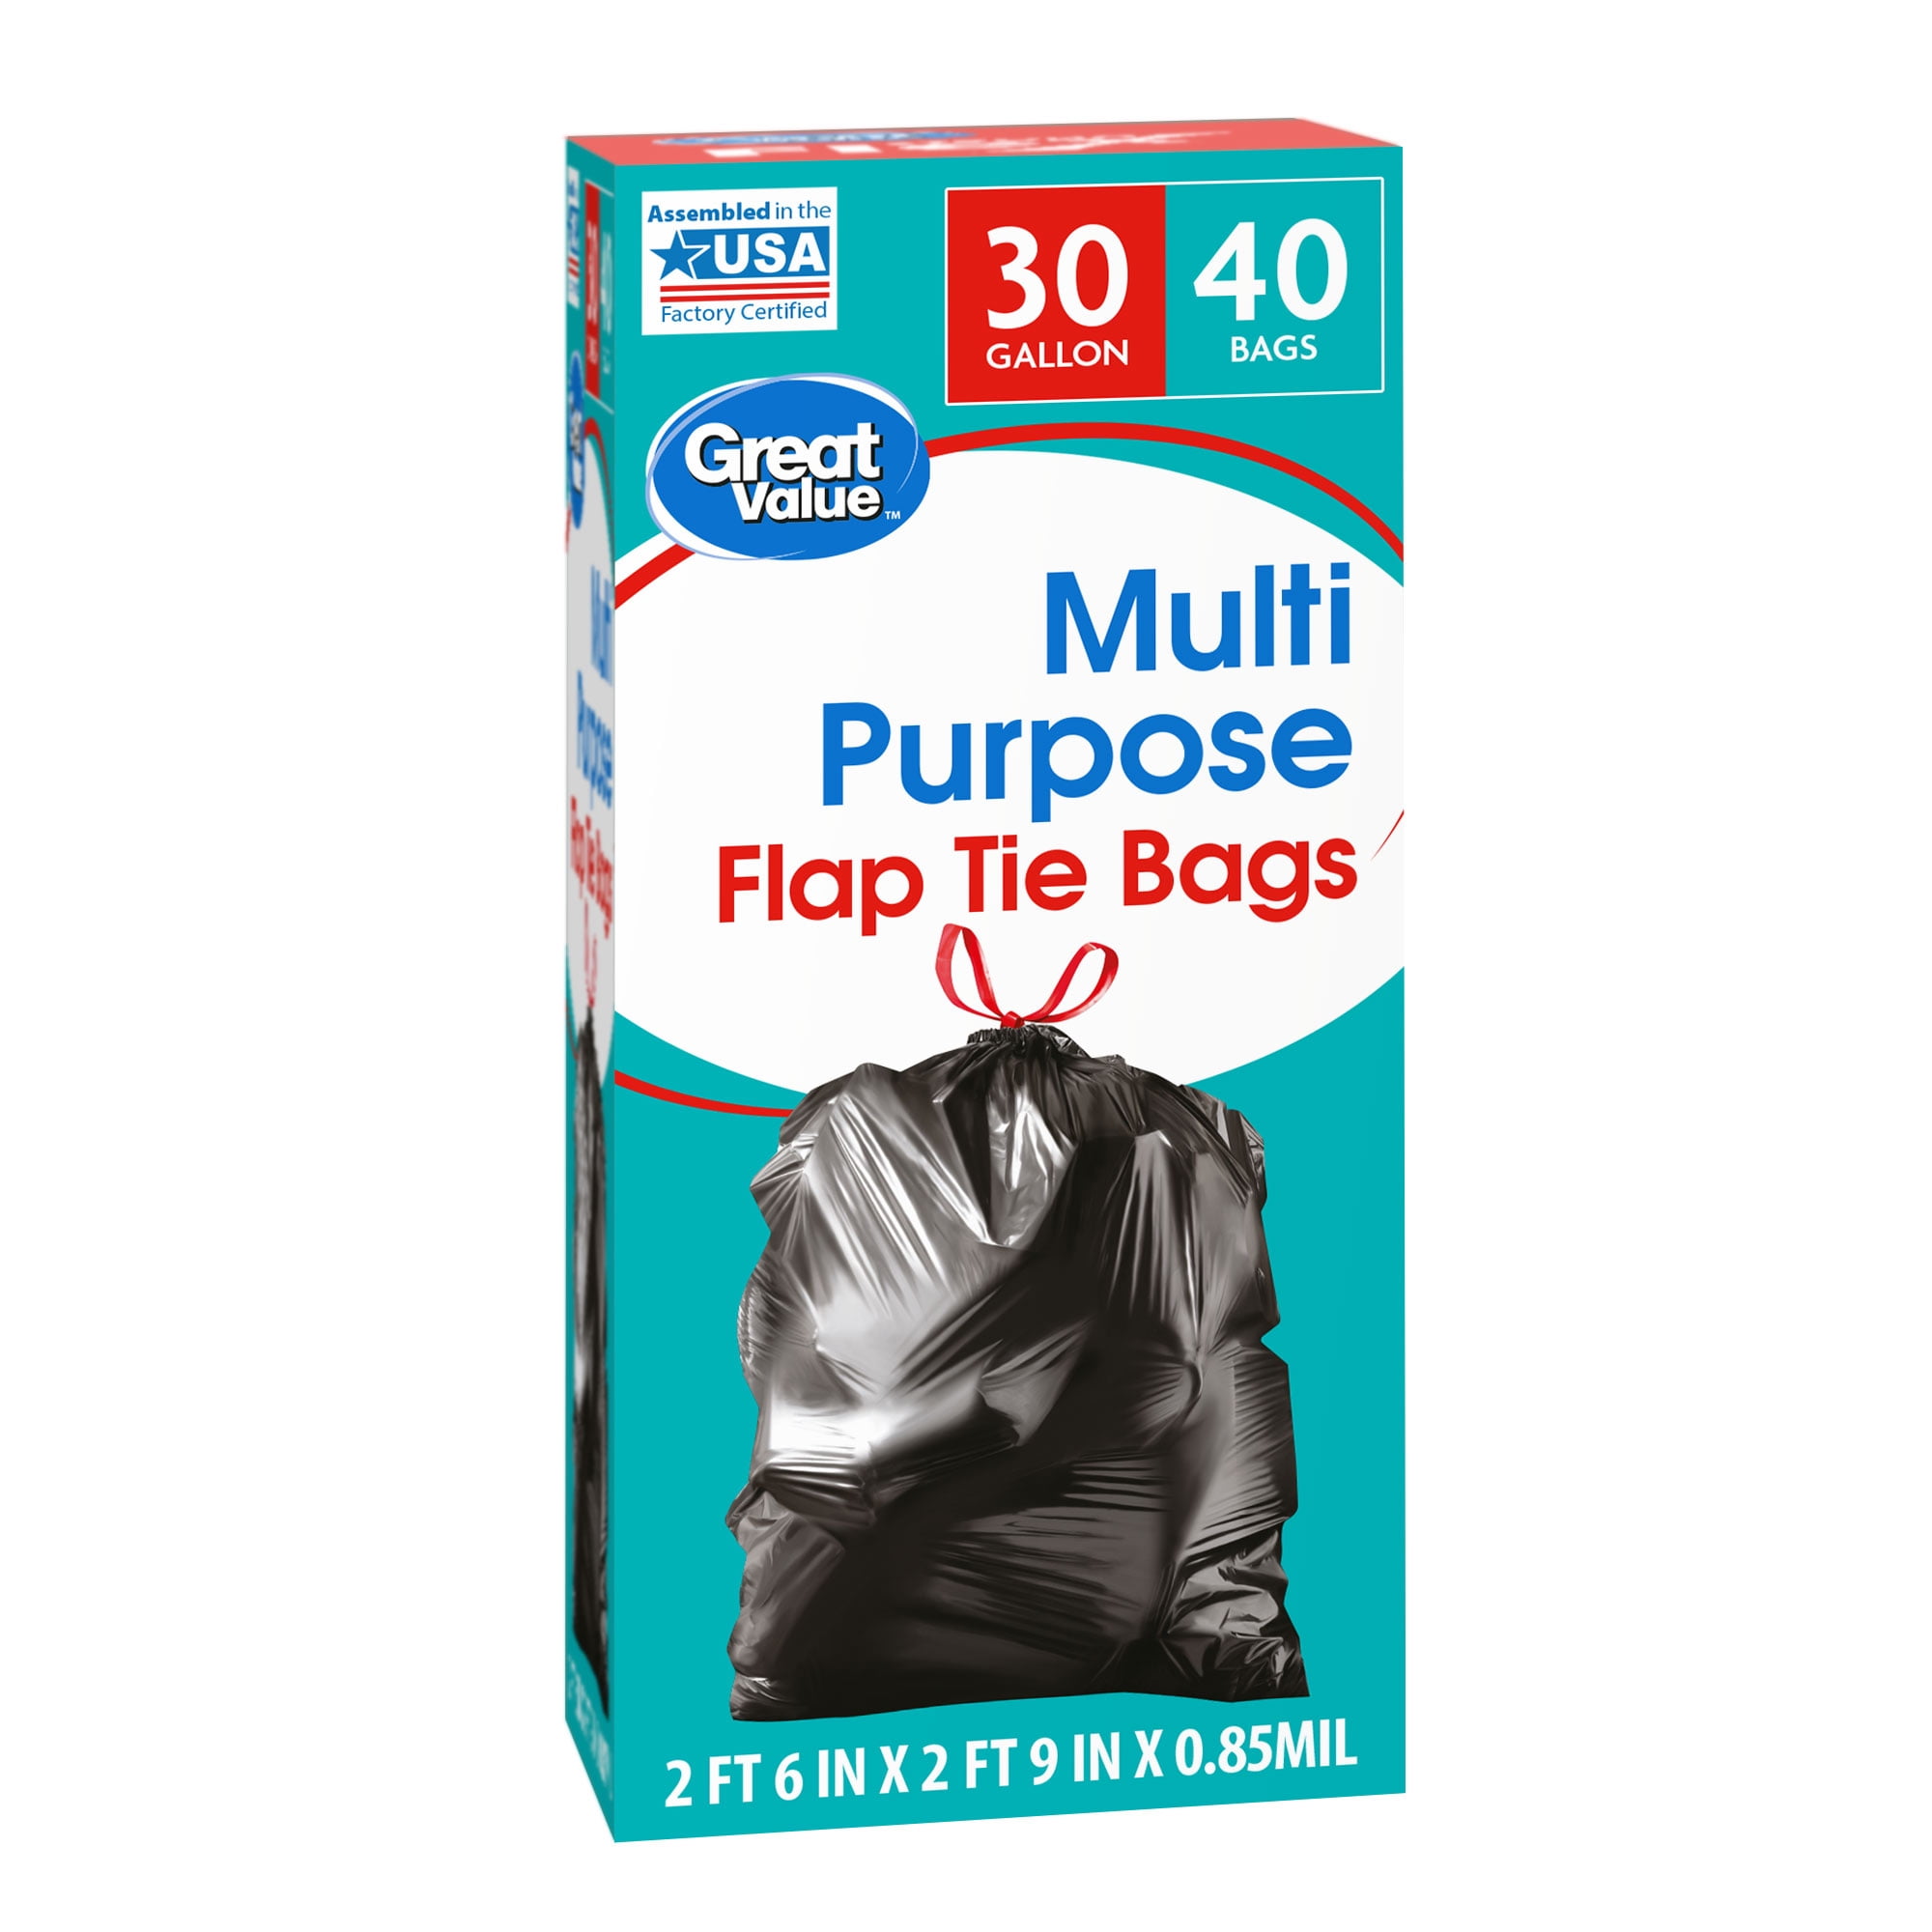 Essential Everyday Trash Bags, Large, Flap Top, 30 Gallon - 40 bags